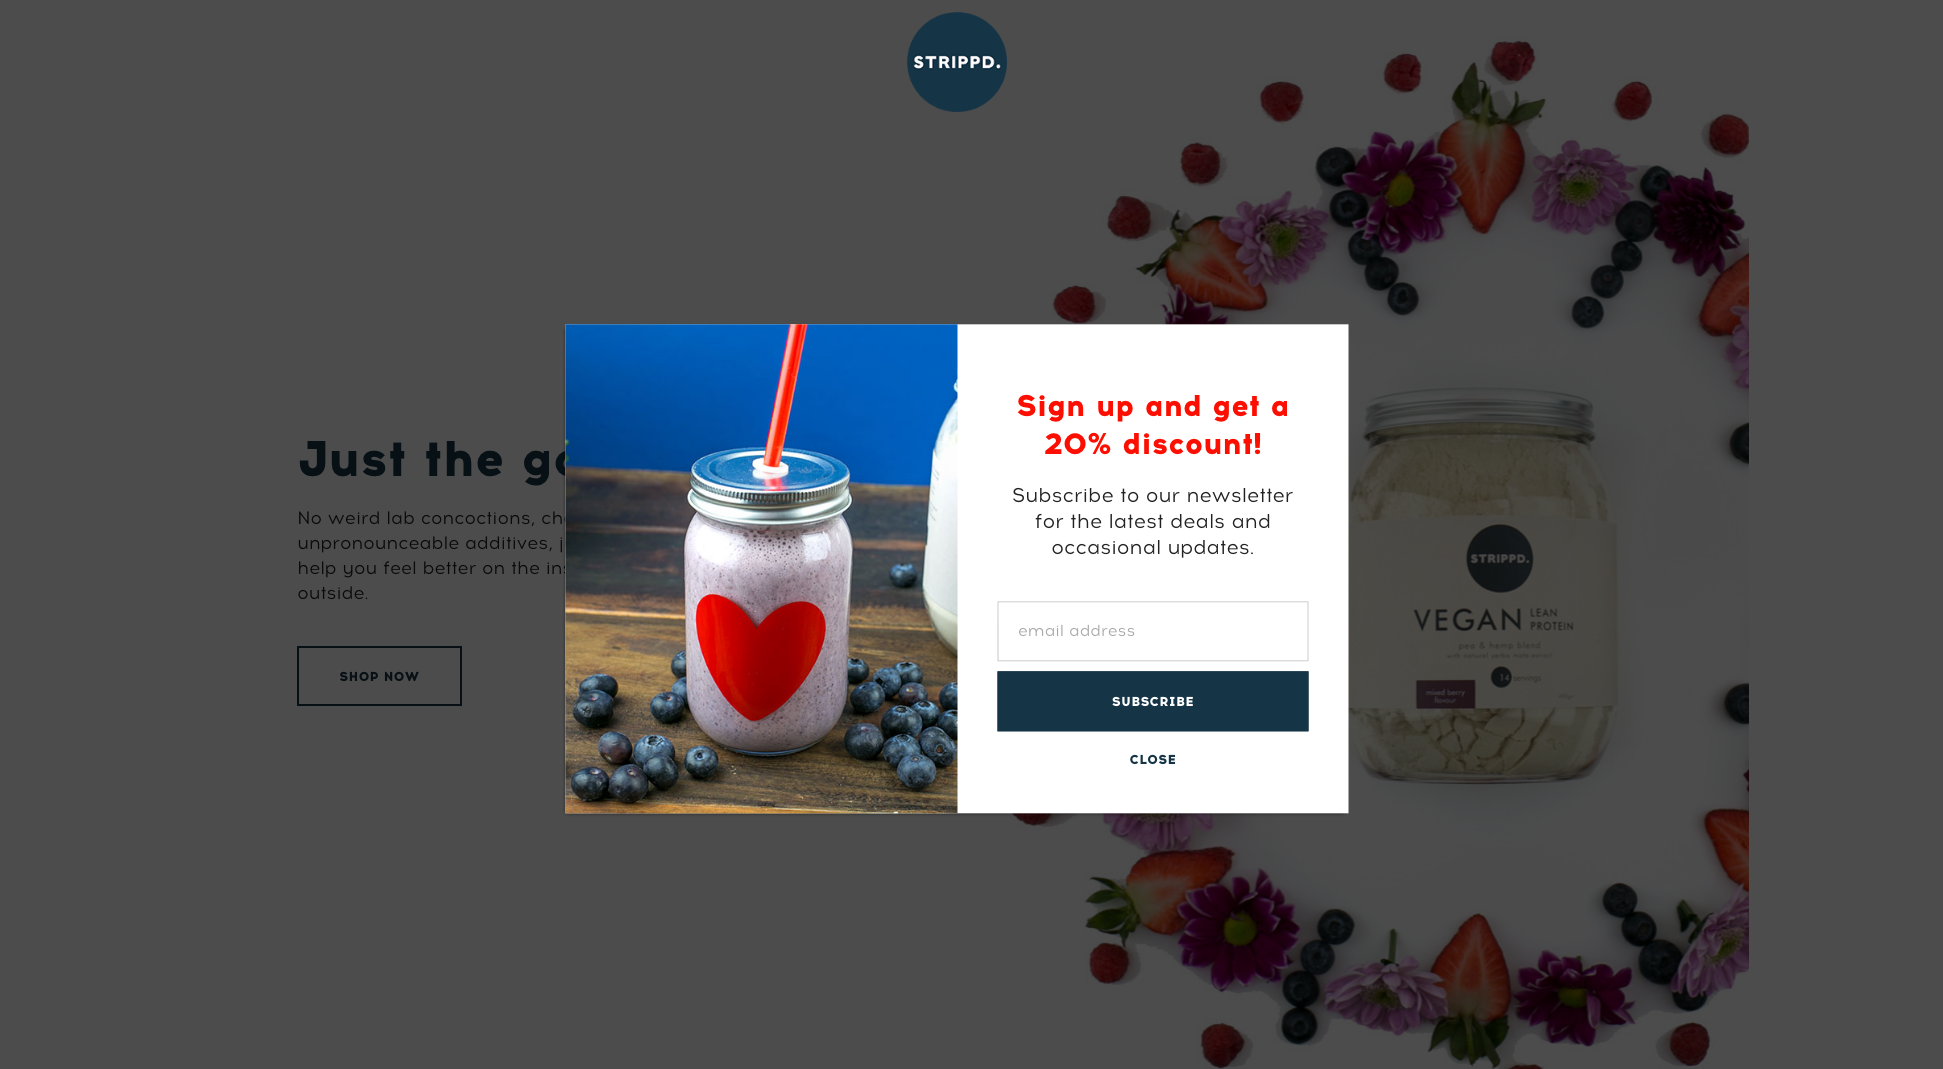 8 ecommerce stores to inspire your valentines day: Strippd popup